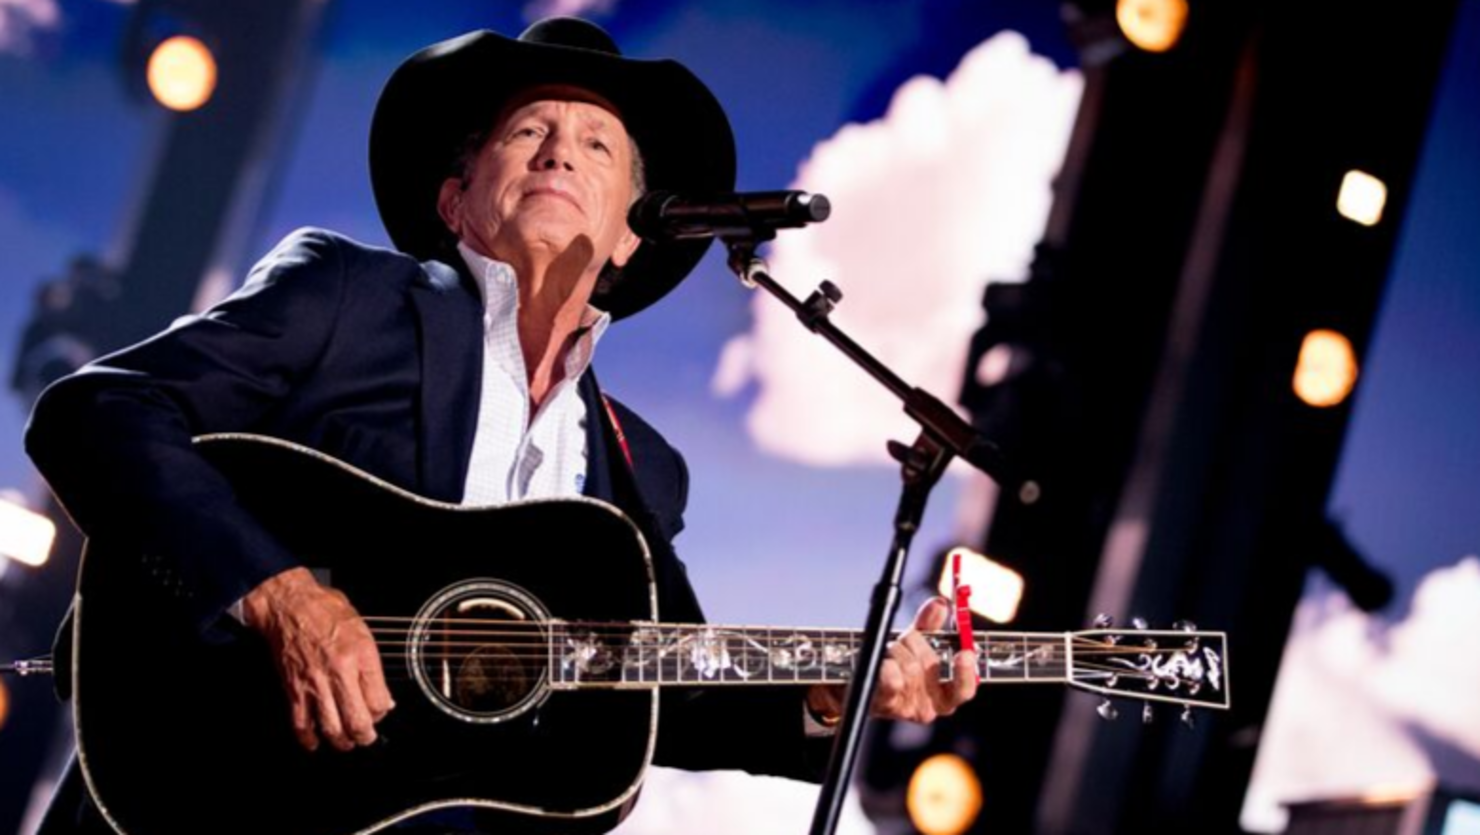 George Strait Honors Police With Heavy New Single 'The Weight Of The Badge'